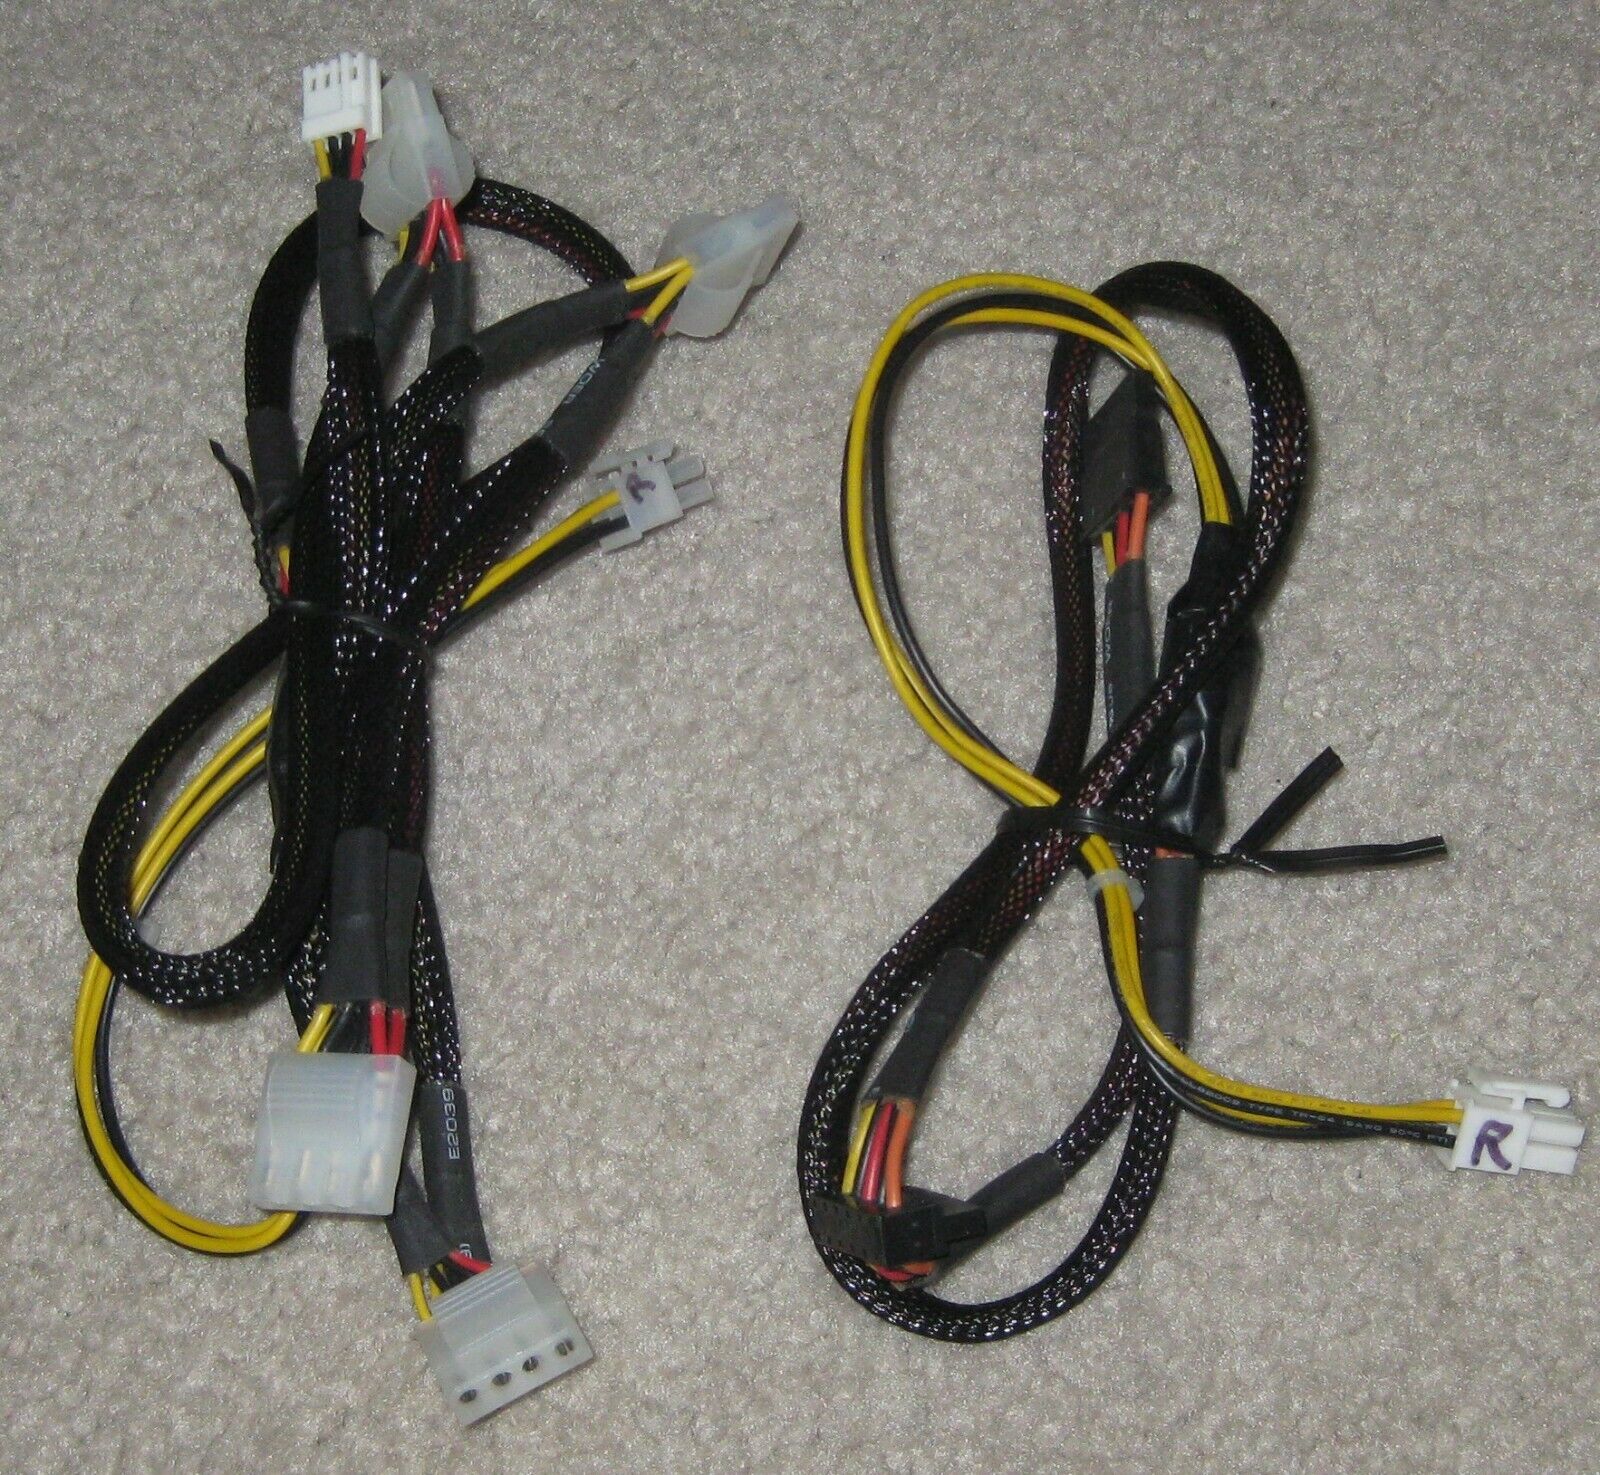 Mad Dog MD-550SCPS ATX Switching Power Supply Cables 550W Intel P4/AMD K8 Used 1